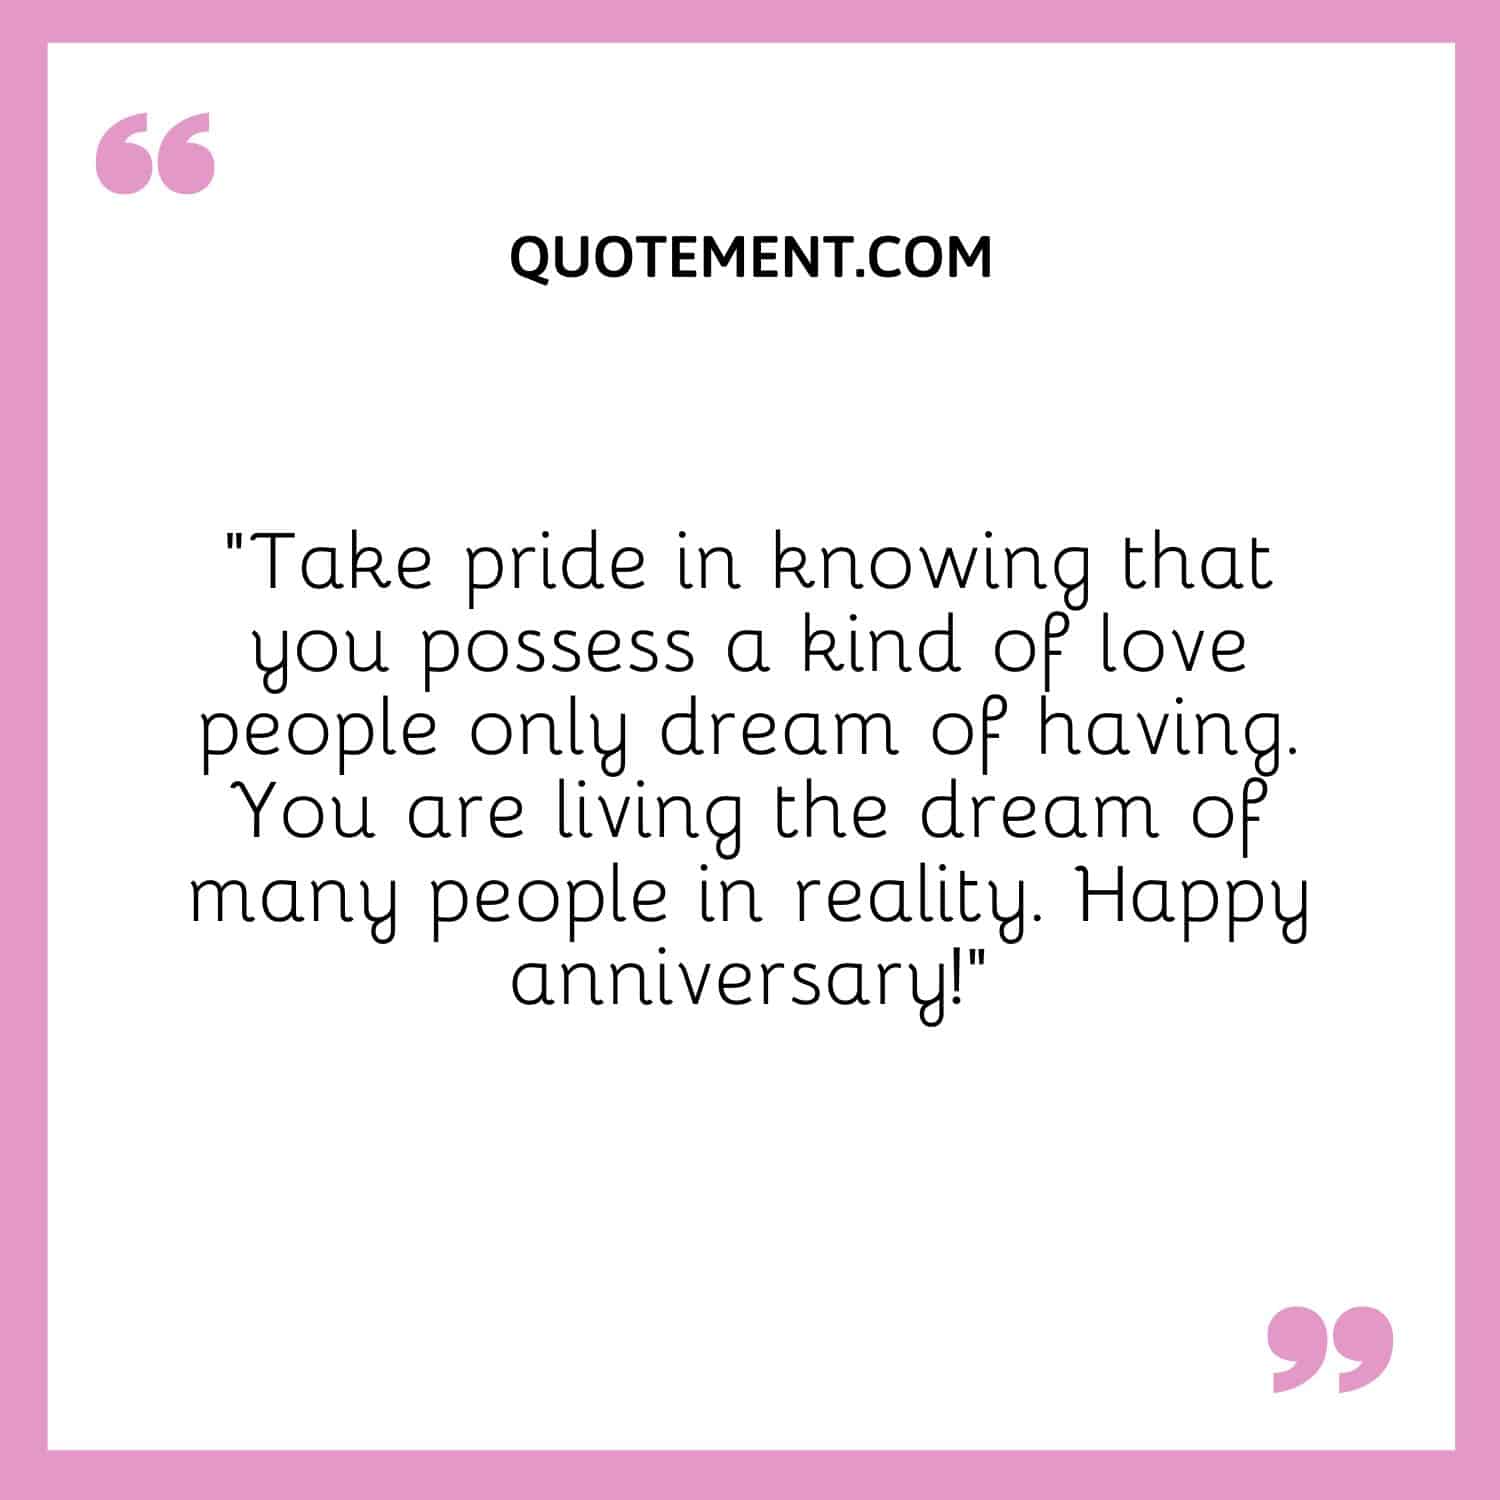 Take pride in knowing that you possess a kind of love people only dream of having